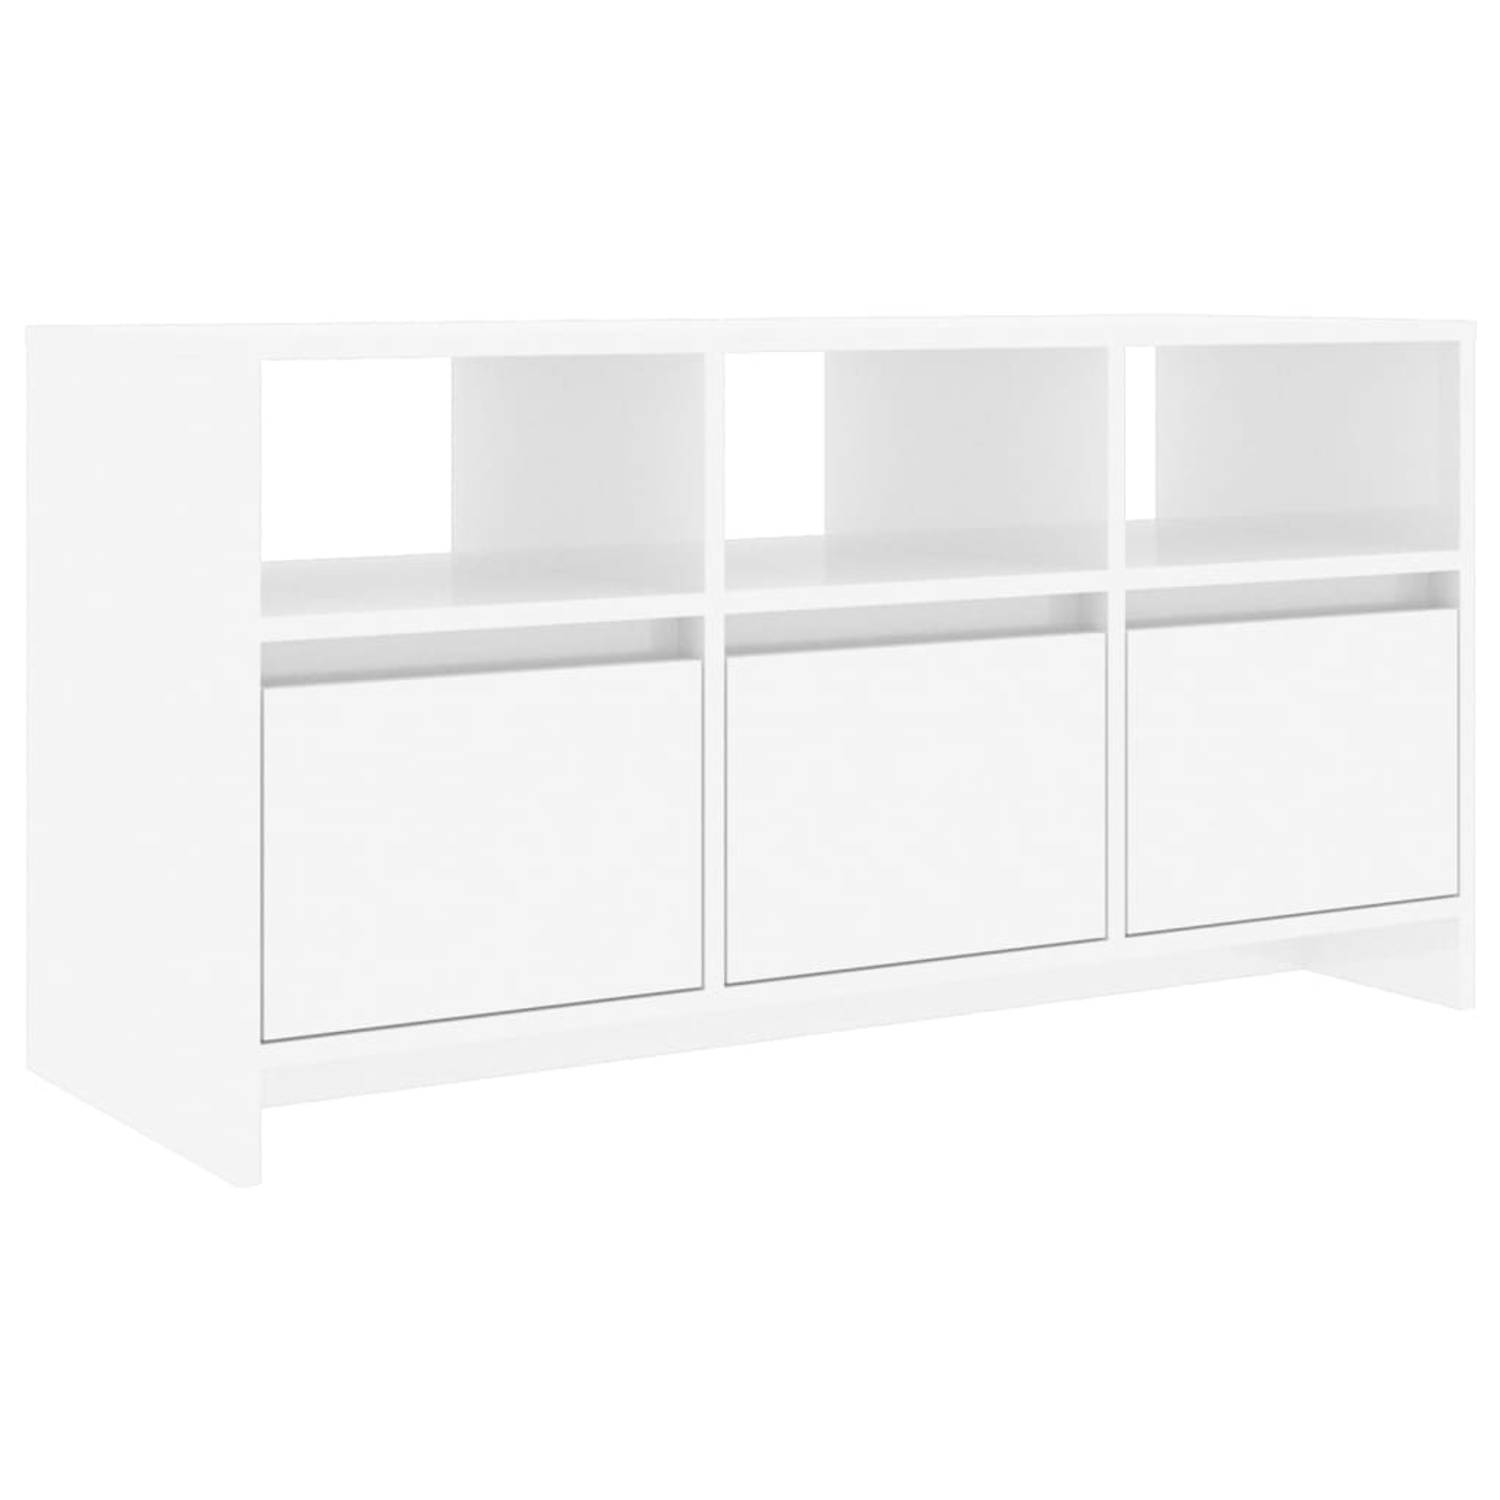 The Living Store TV-meubel - Treviso-Styled - Wit - 102 x 37.5 x 52.5 cm - Stabiele constructie